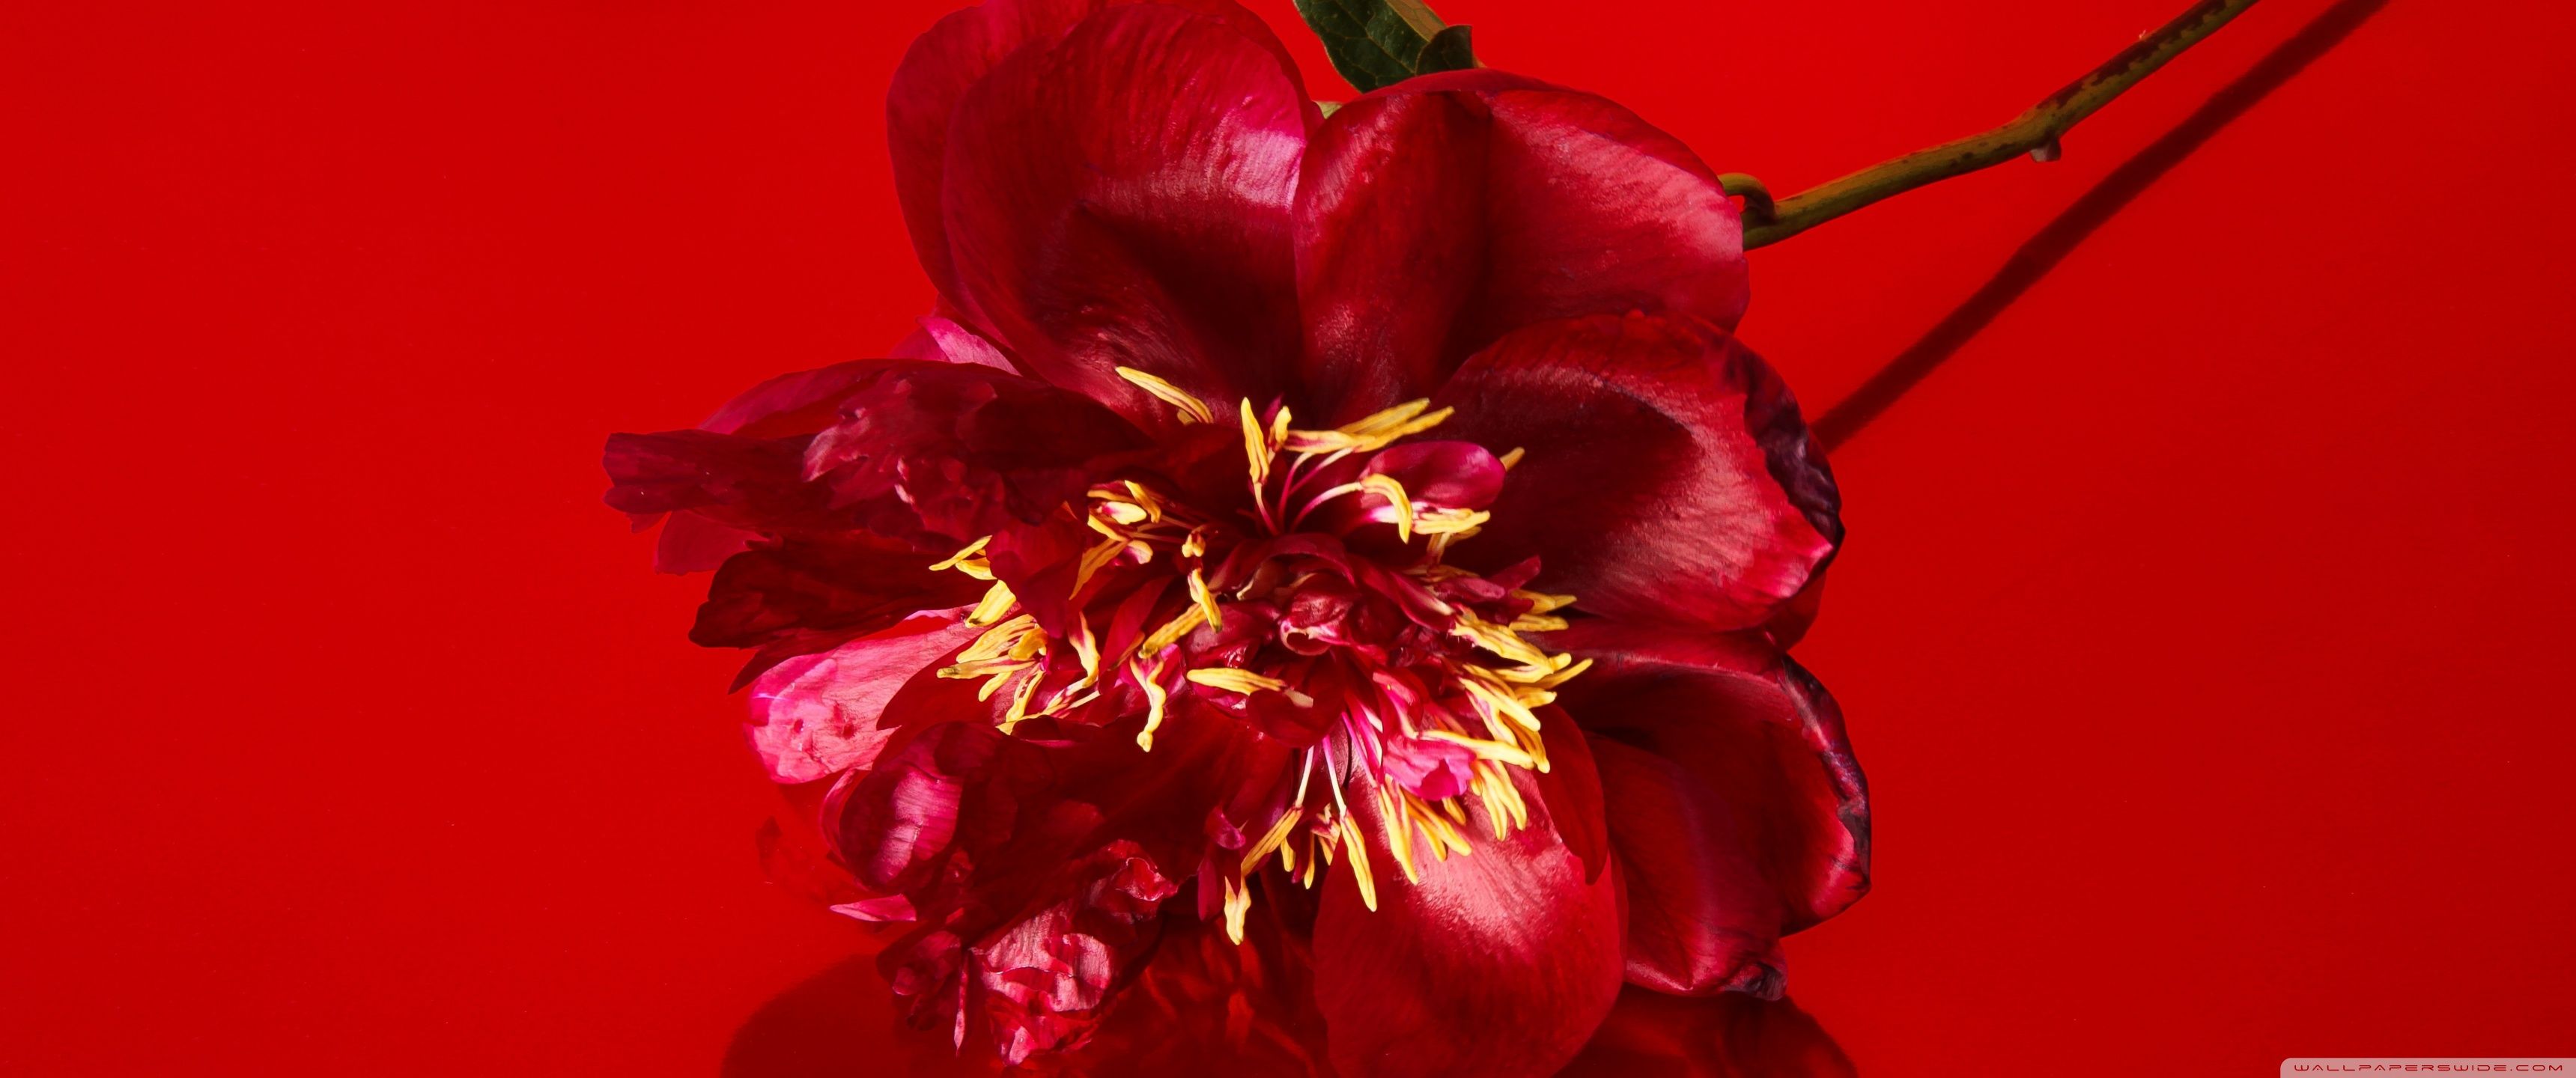 A red flower on a red background - 3440x1440